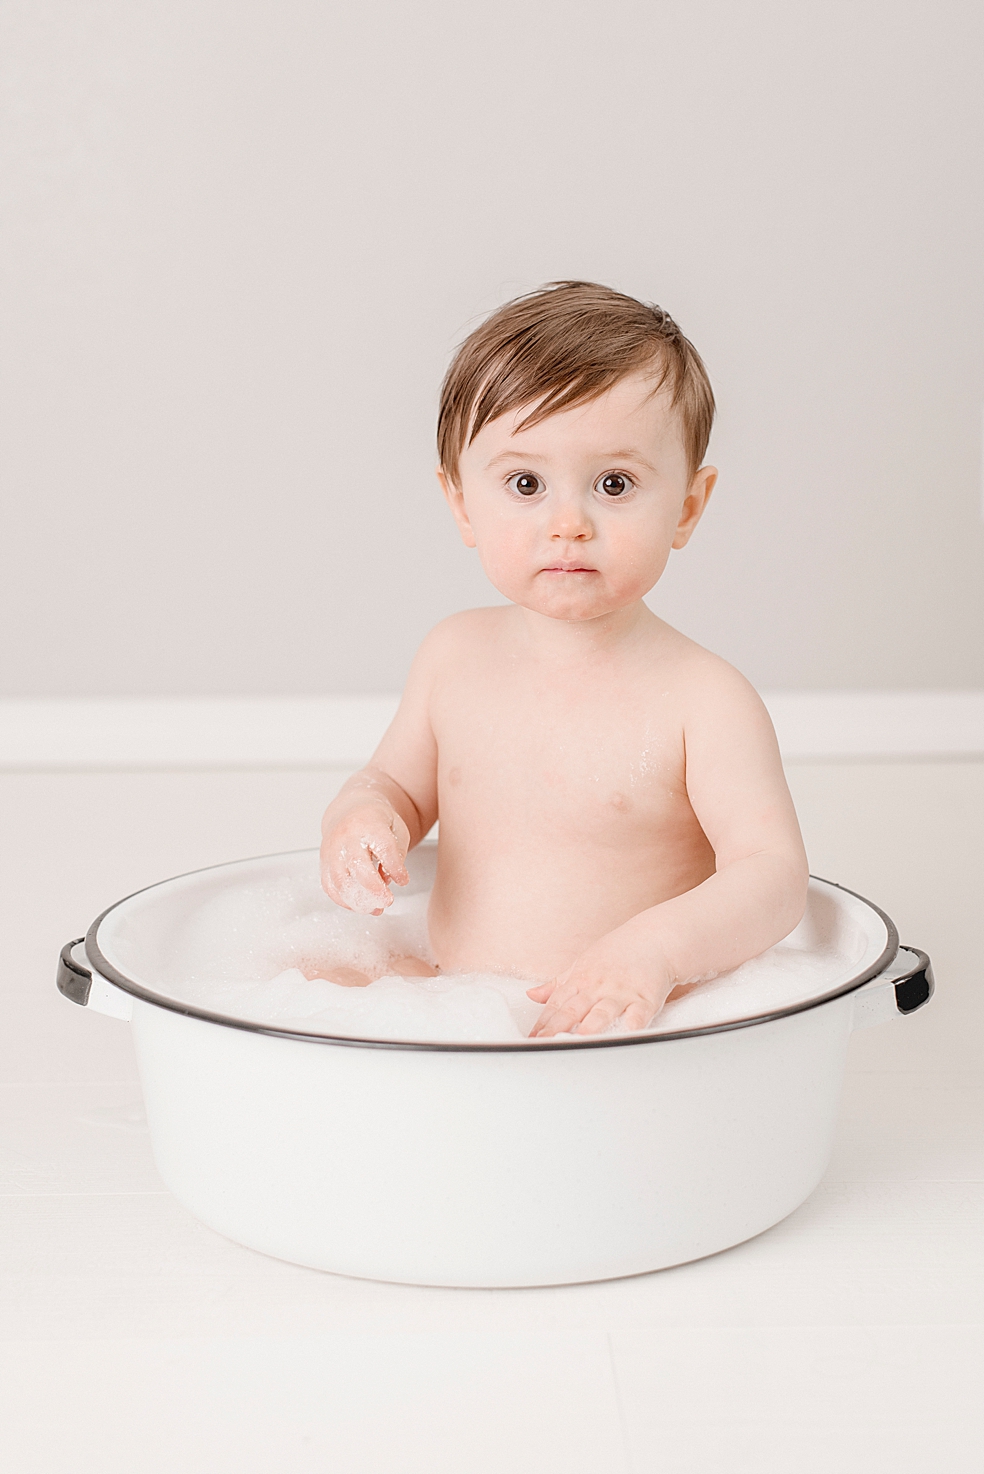 Baby boy in a bubble bath | Photo by Jessica Lee Photography